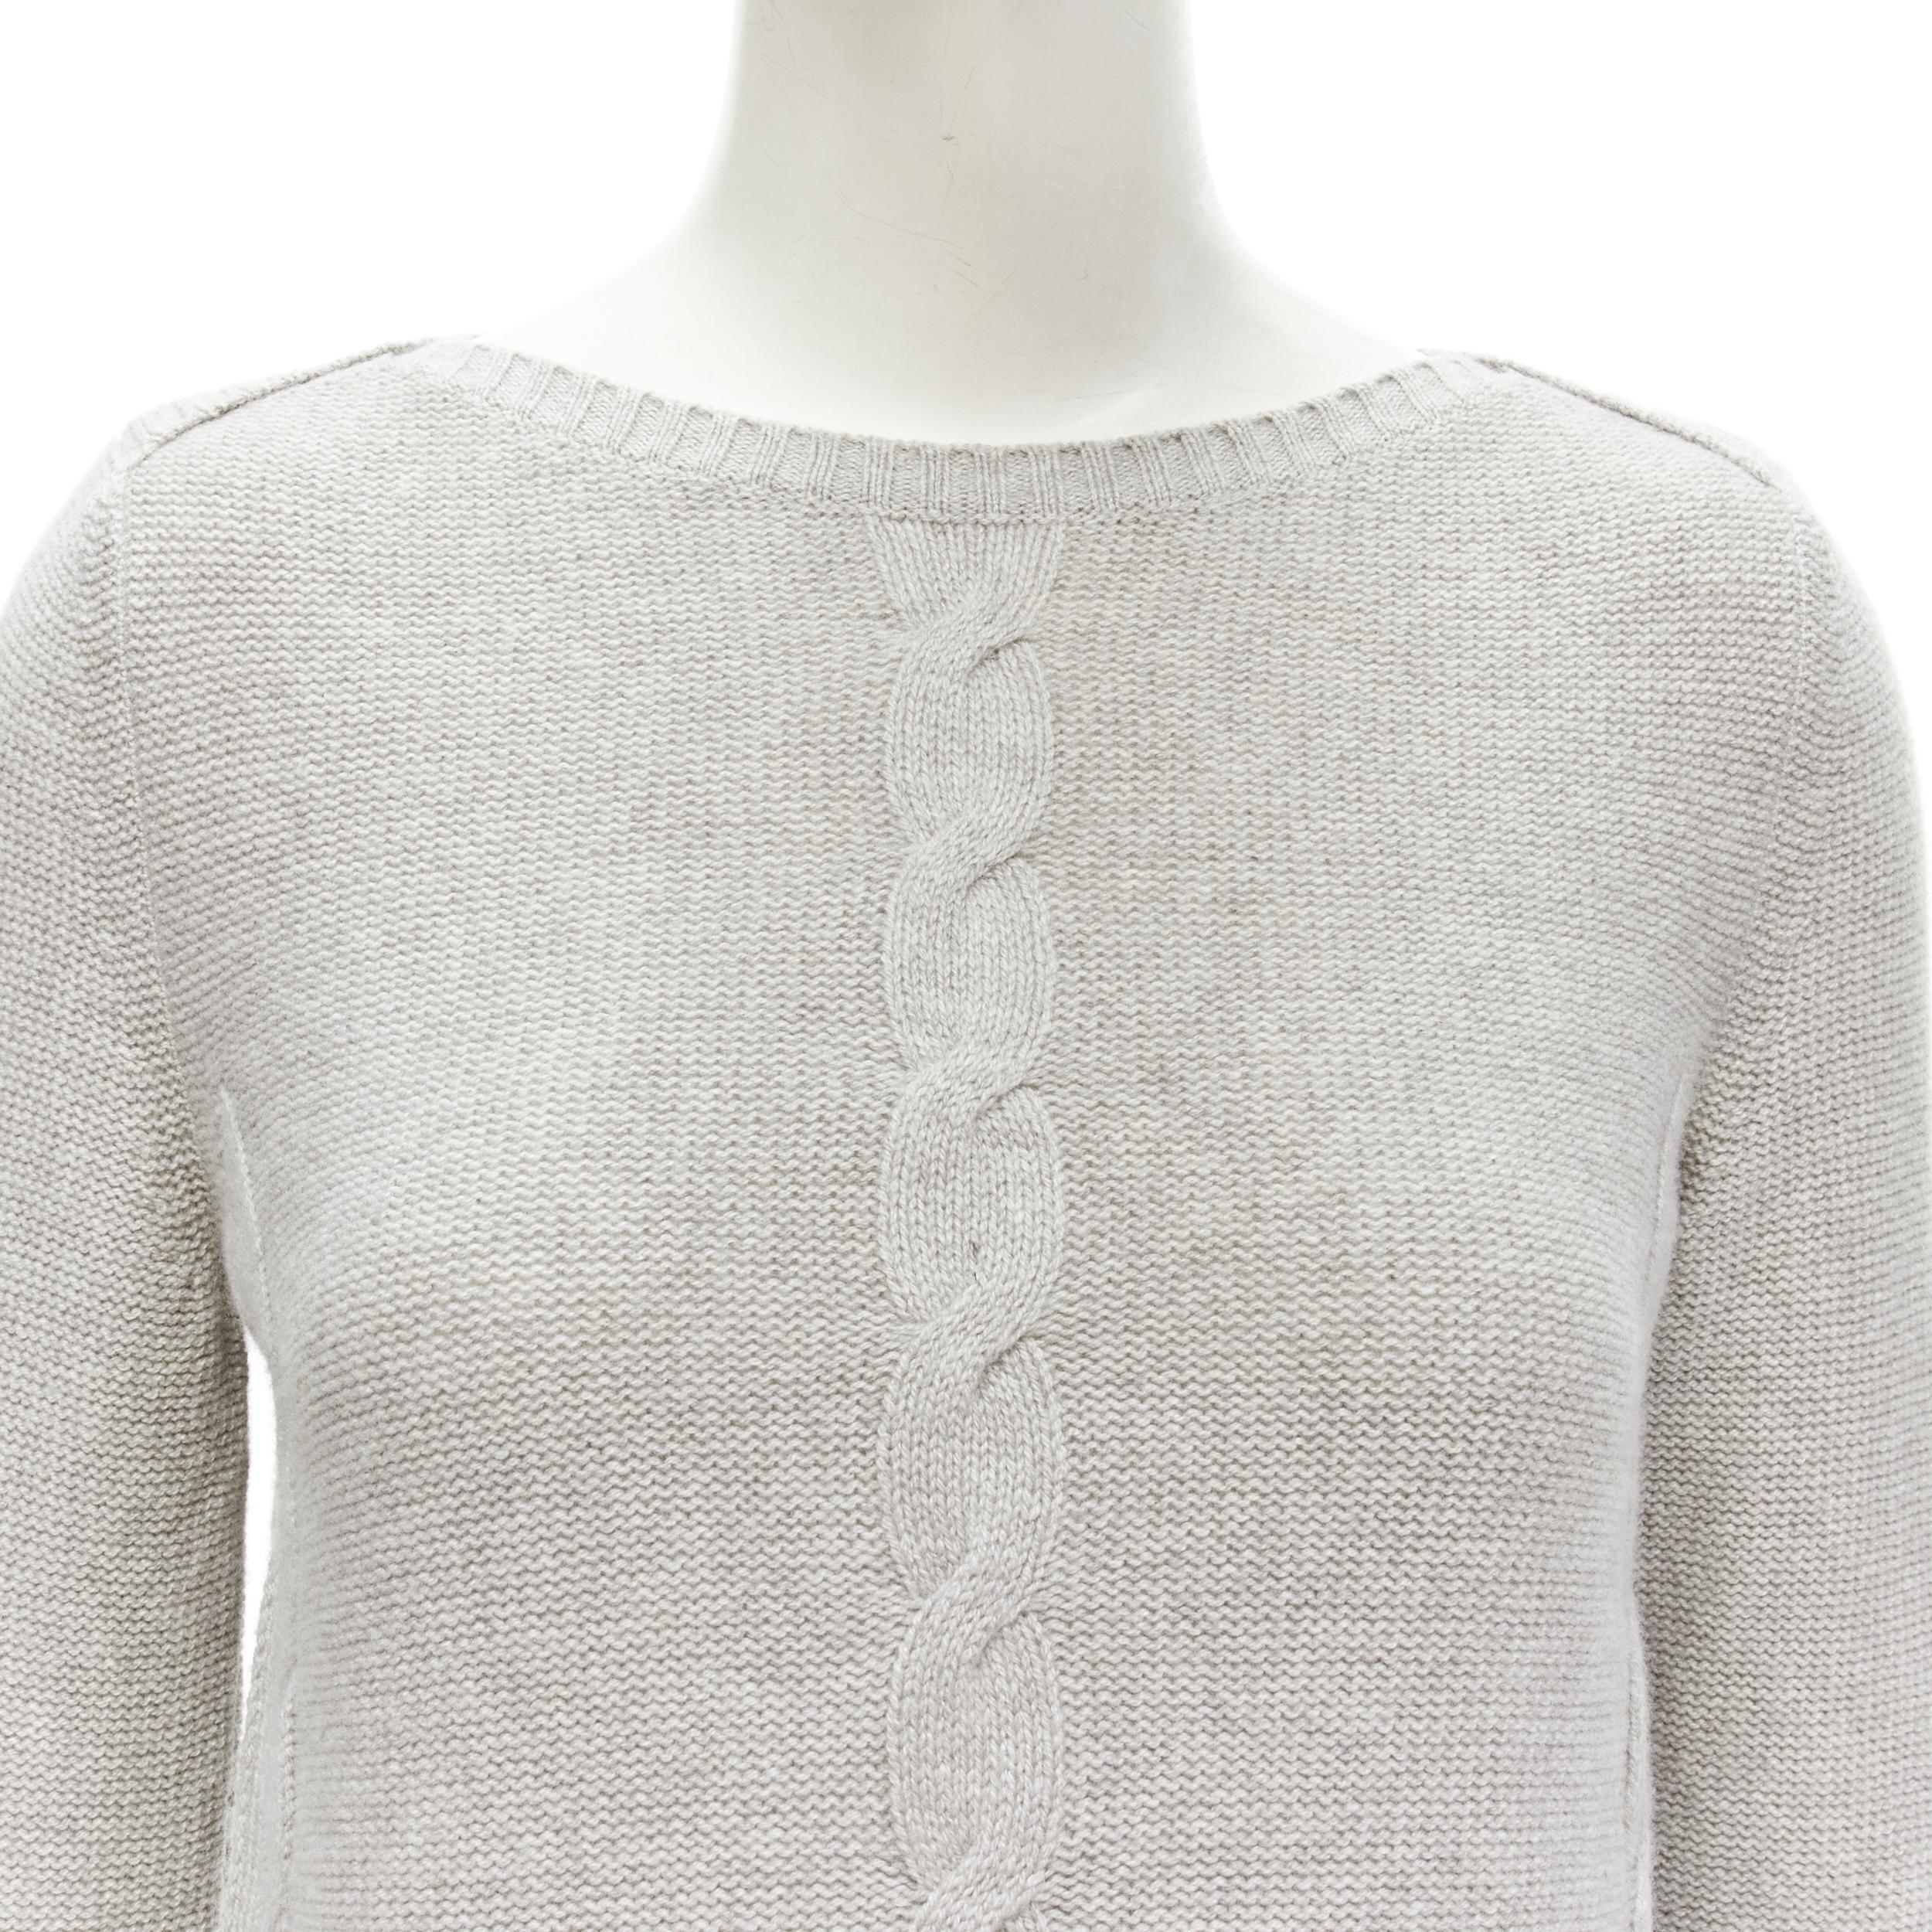 LORO PIANA 100% baby cashmere grey braid knit bateau neck sweater IT38 XS
Reference: TGAS/C01871
Brand: Loro Piana
Material: Cashmere
Color: Grey
Pattern: Solid
Closure: Pullover
Made in: Italy

CONDITION:
Condition: Excellent, this item was